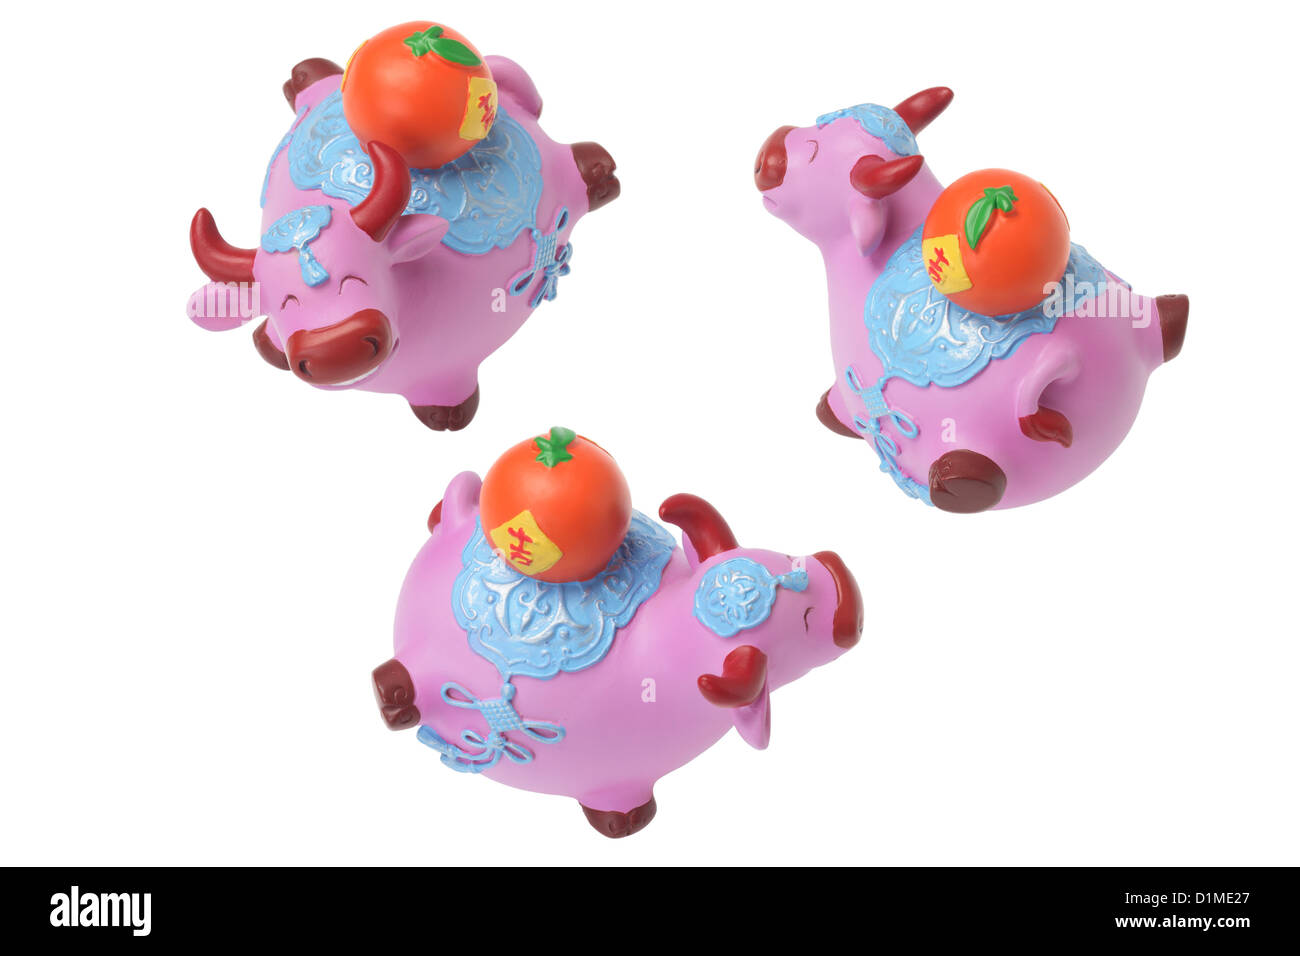 Ox Figurines Chinese New Year Ornaments on White Background Stock Photo